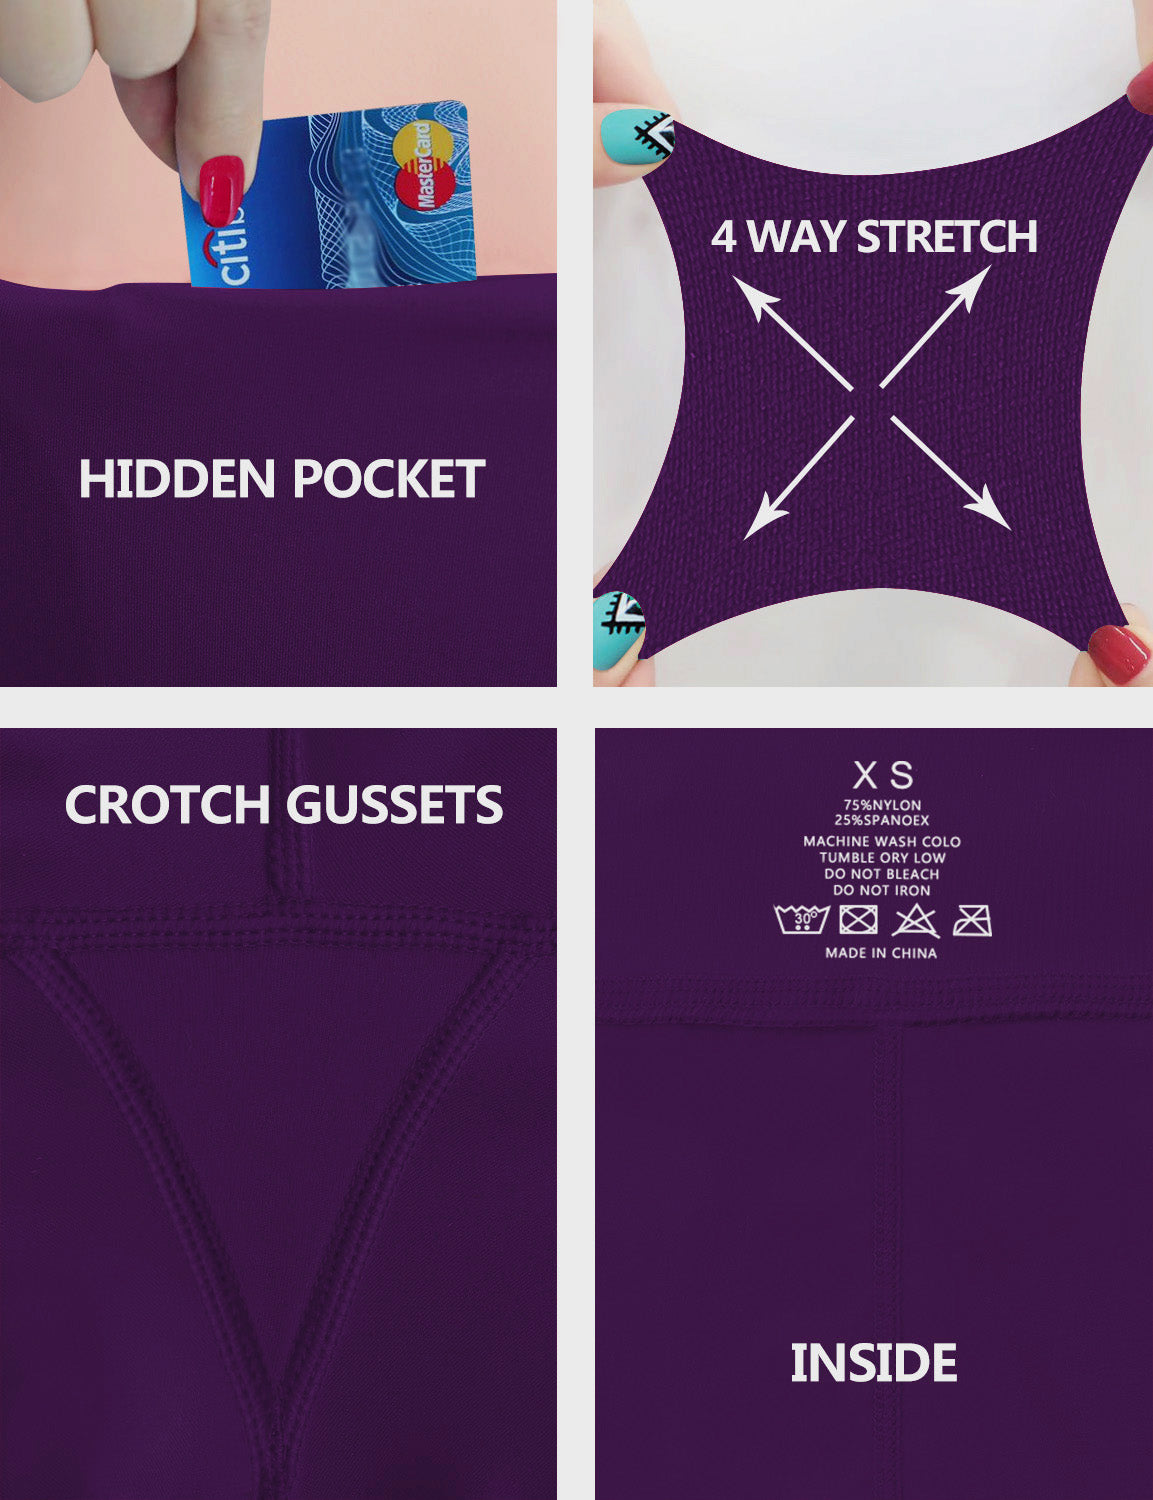 High Waist Side Pockets Running Pants eggplantpurple 75% Nylon, 25% Spandex Fabric doesn't attract lint easily 4-way stretch No see-through Moisture-wicking Tummy control Inner pocket